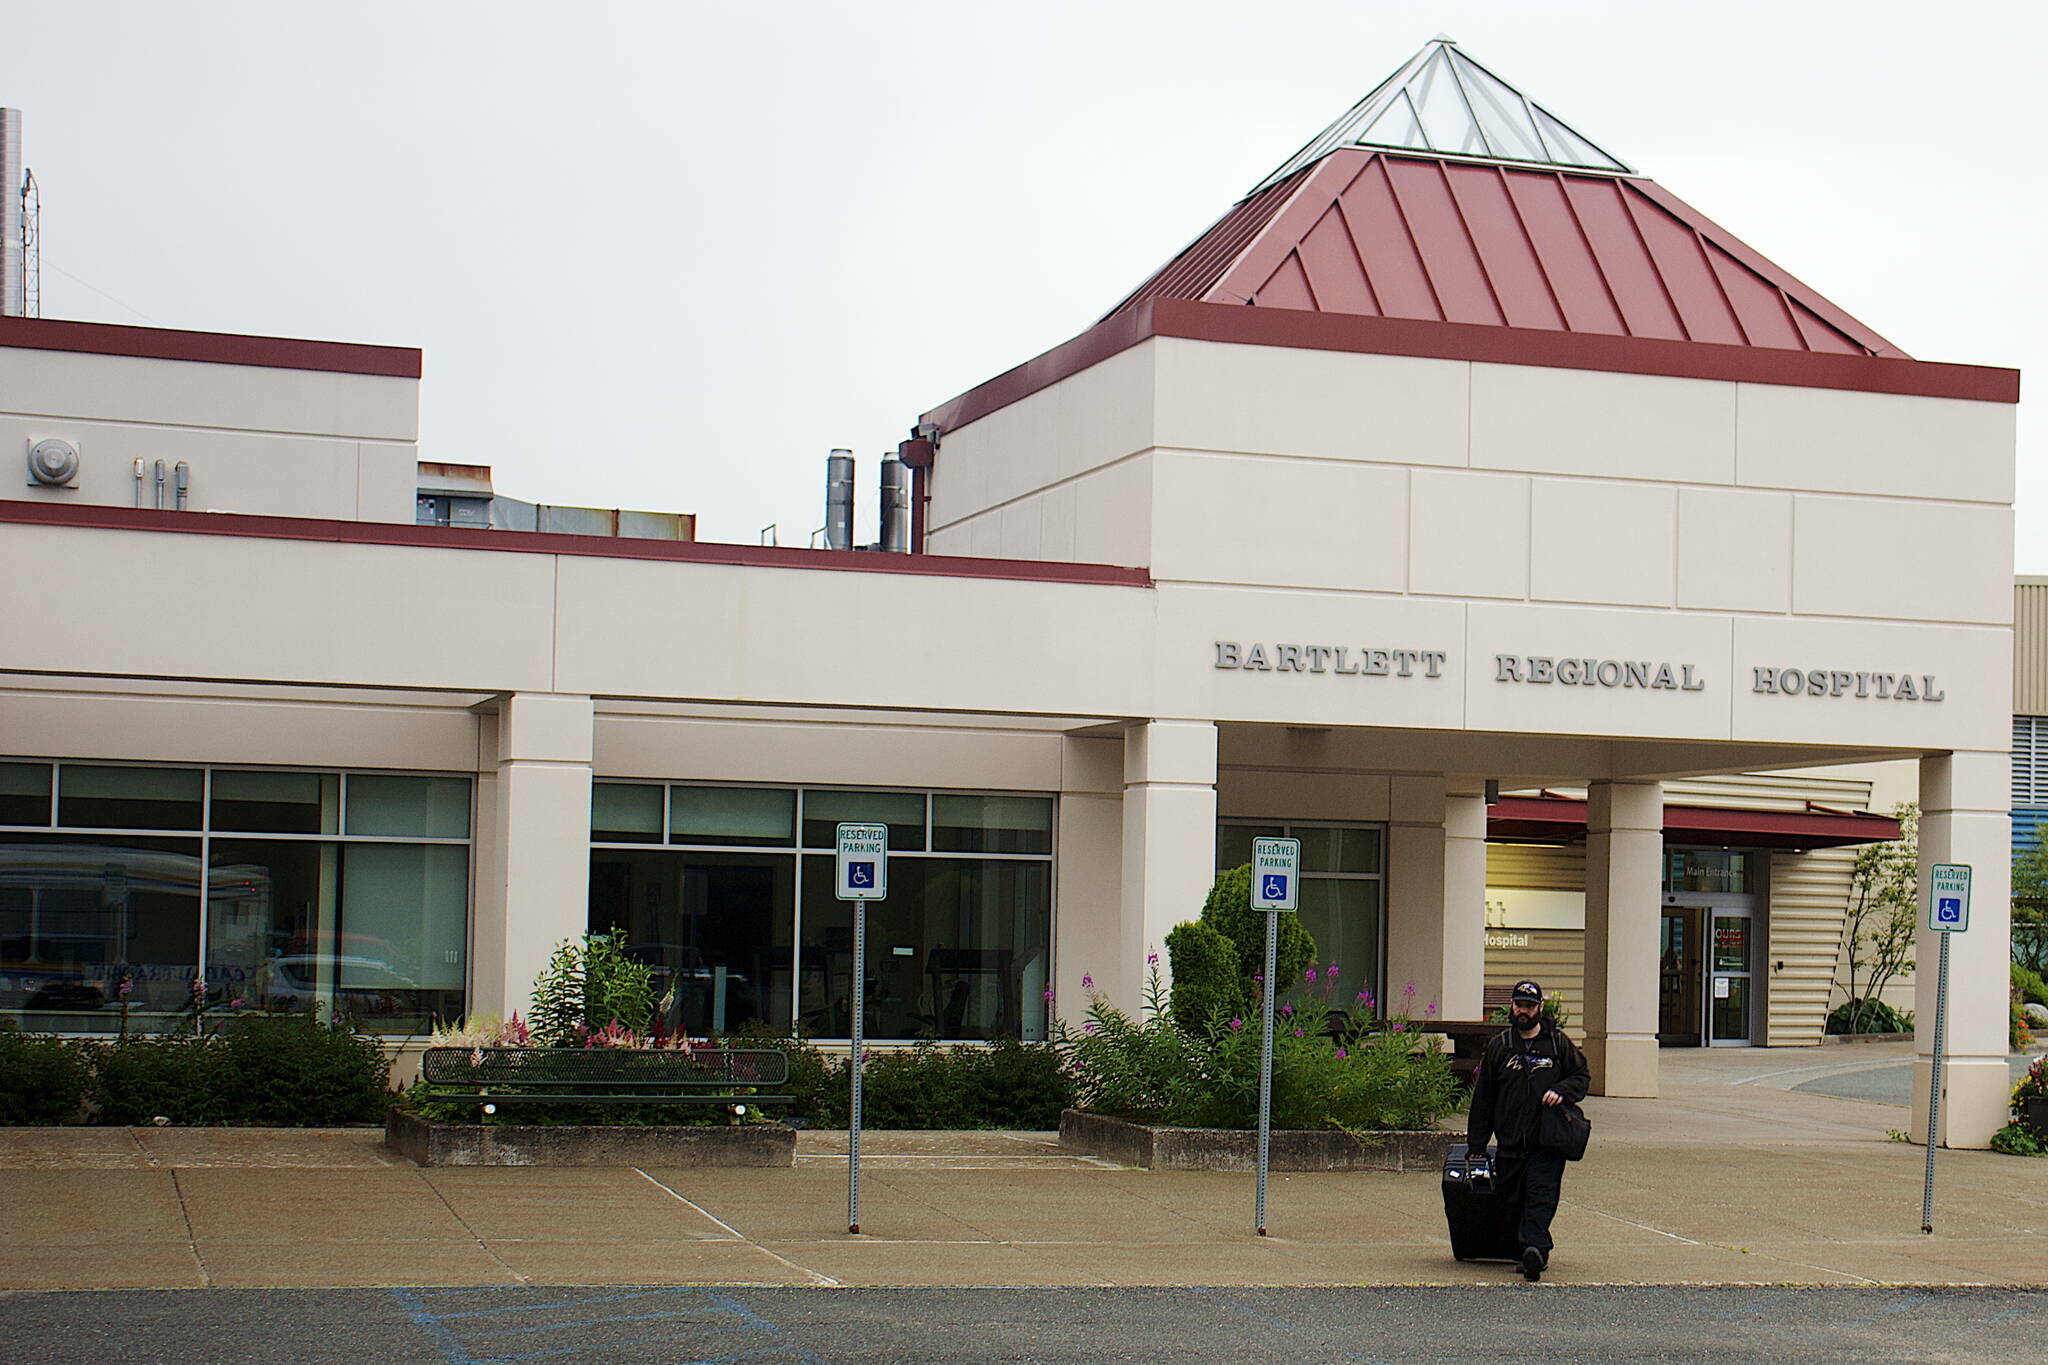 A person departs Bartlett Regional Hospital on July 26, a day after a board of directors meeting raised issues about the hospital’s leadership and quality of care, with then-CEO David Keith resigning a week later. (Mark Sabbatini / Juneau Empire File)